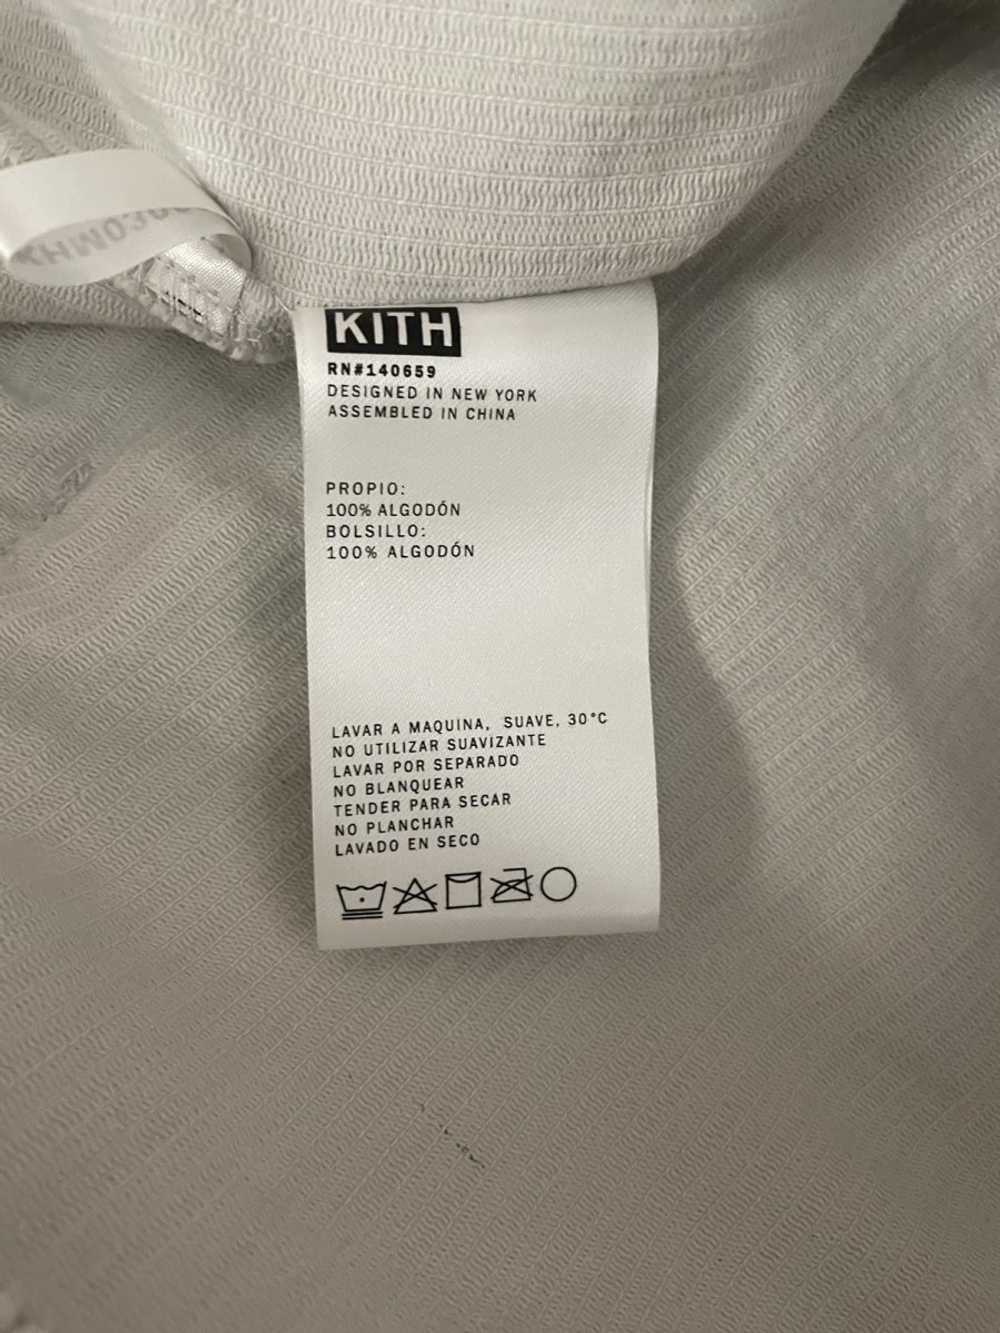 Kith - Corduroy double pocket hoodie with tags - image 9